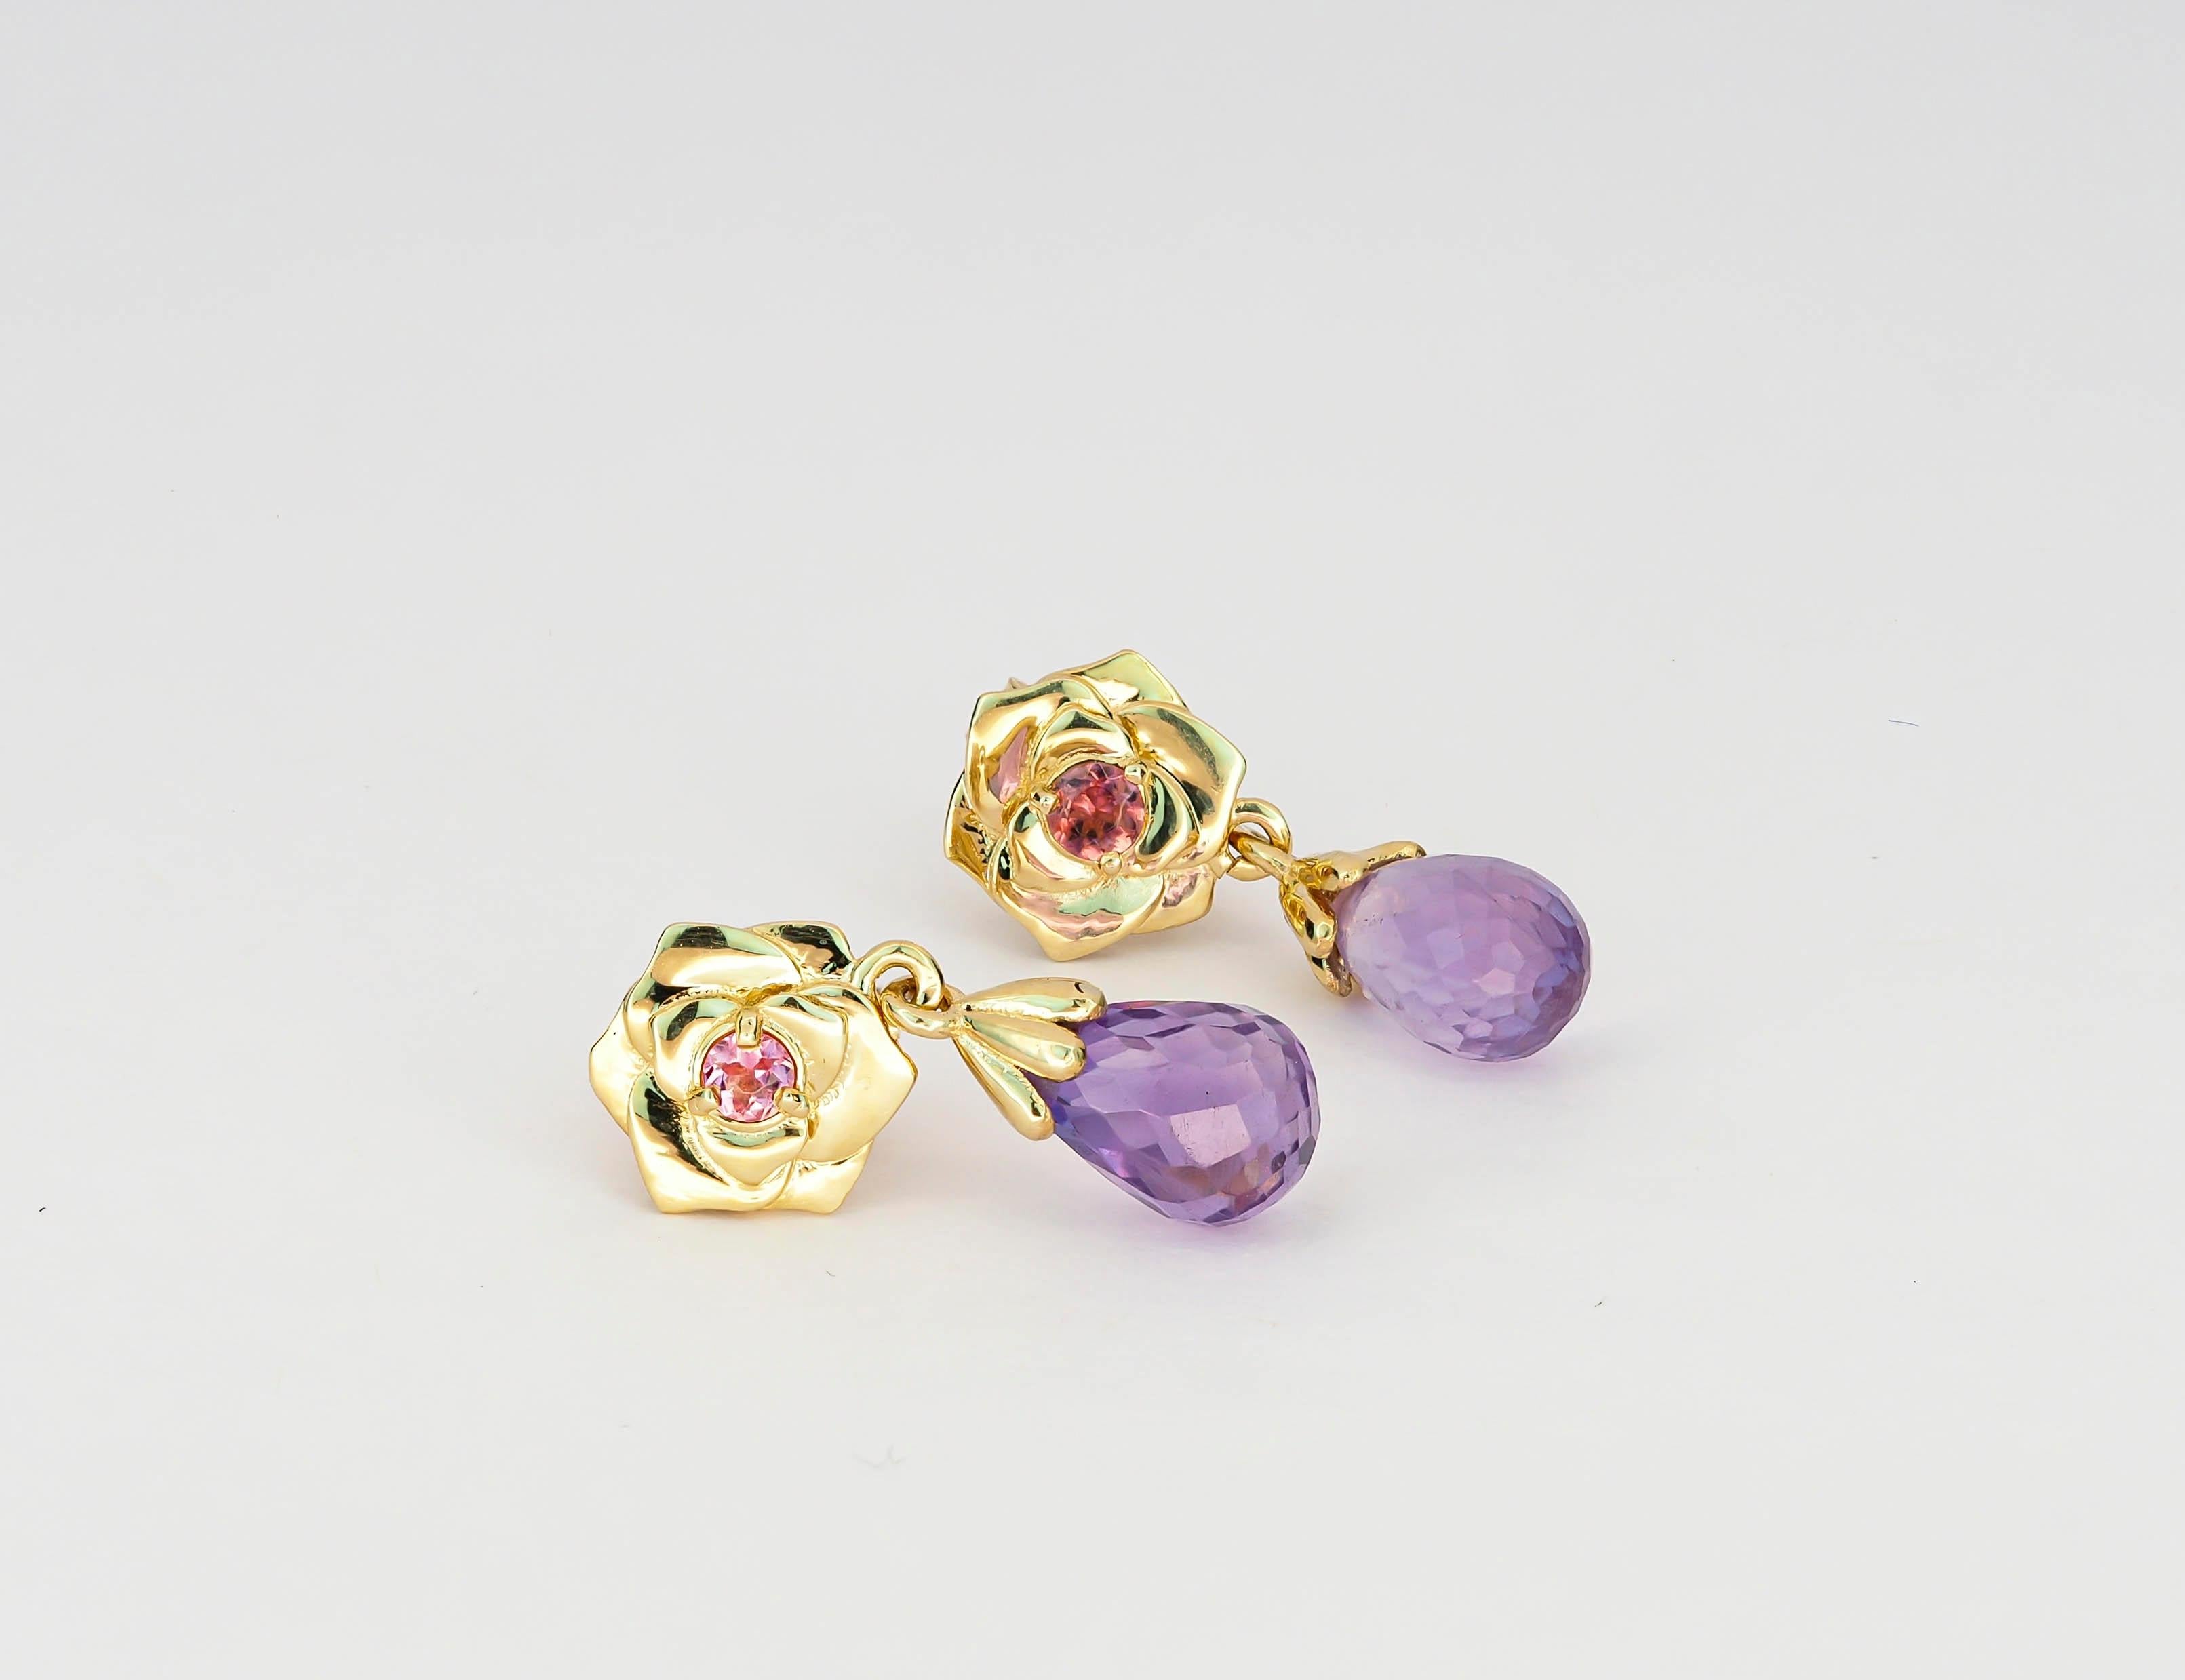 Briolette Cut 14 K Gold Rose Flower Earrings Studs with Amethysts and Sapphires For Sale